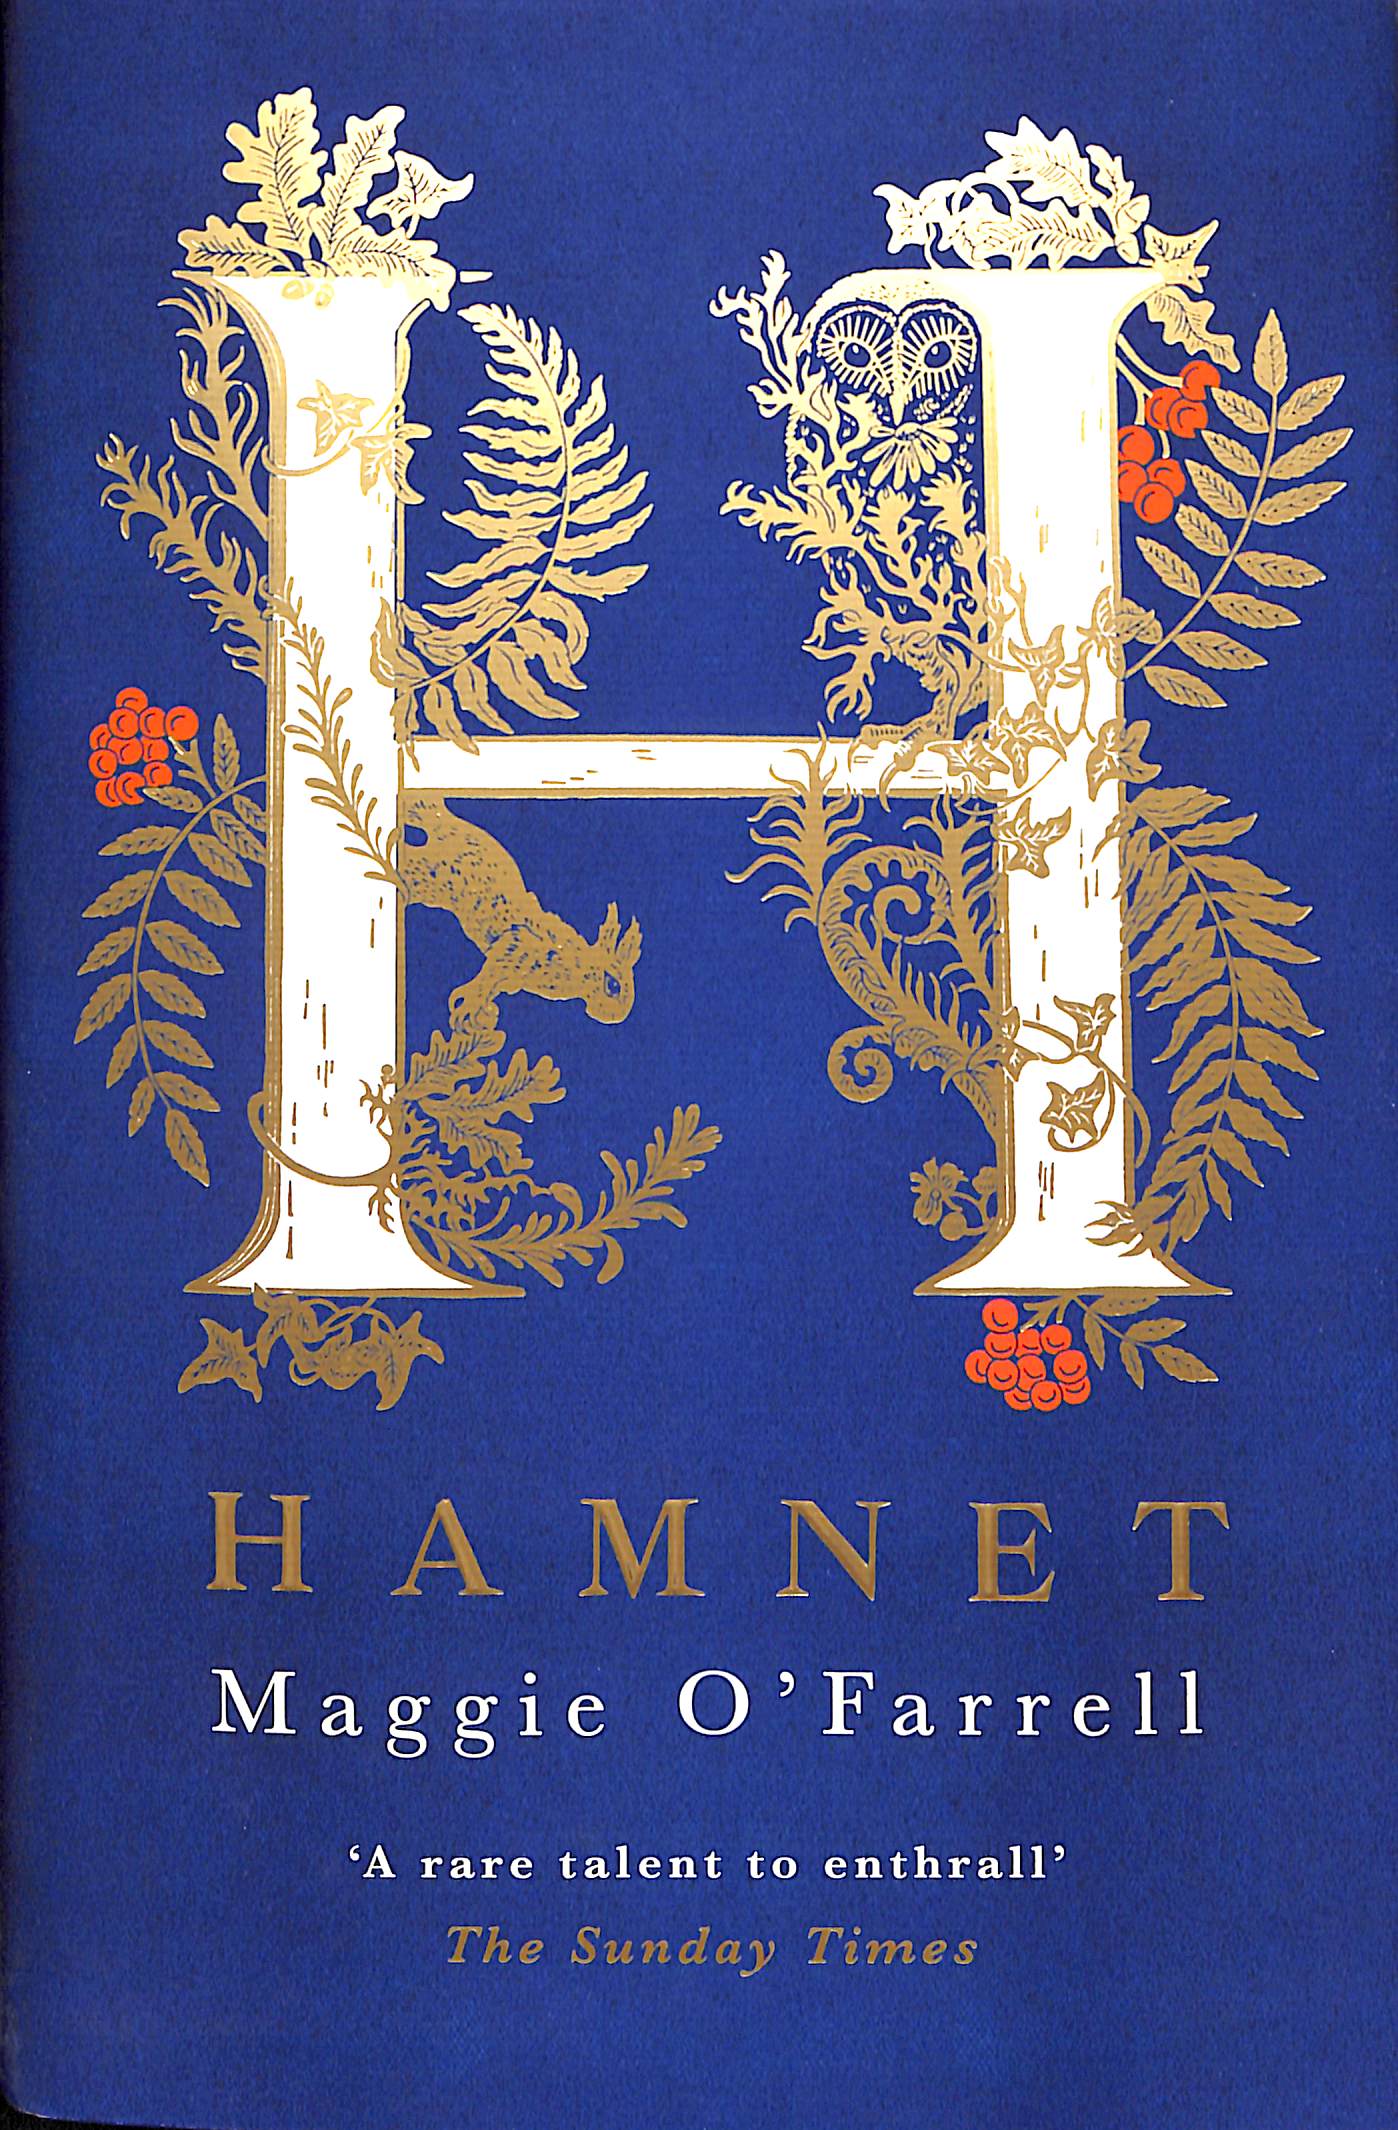 book review of hamnet by maggie o'farrell